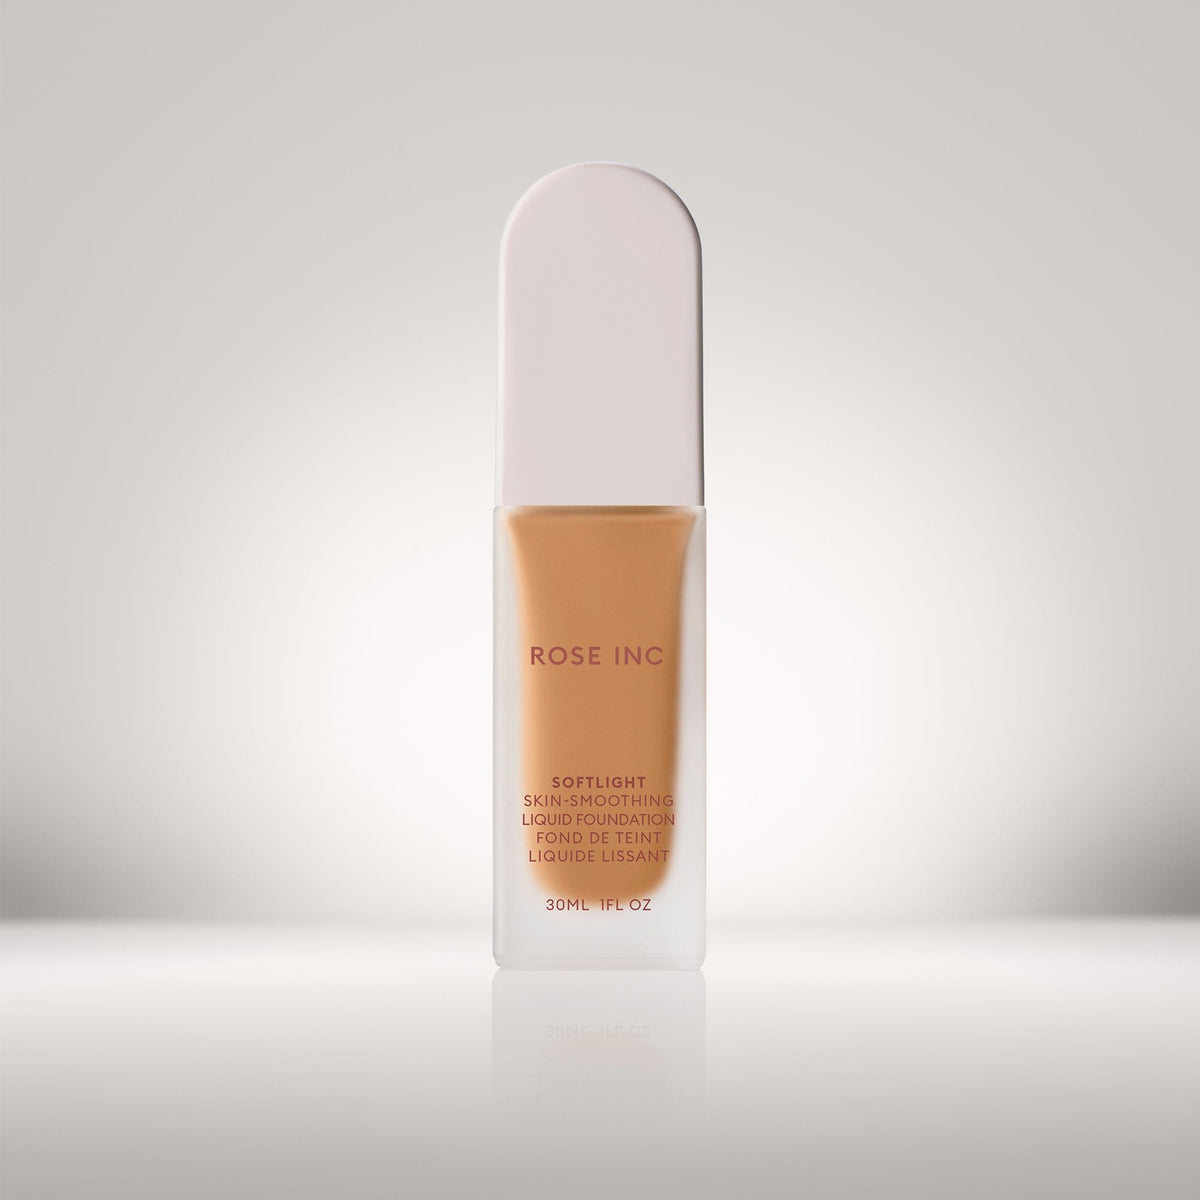 Soldier image of shade 21W in Softlight Smoothing Foundation